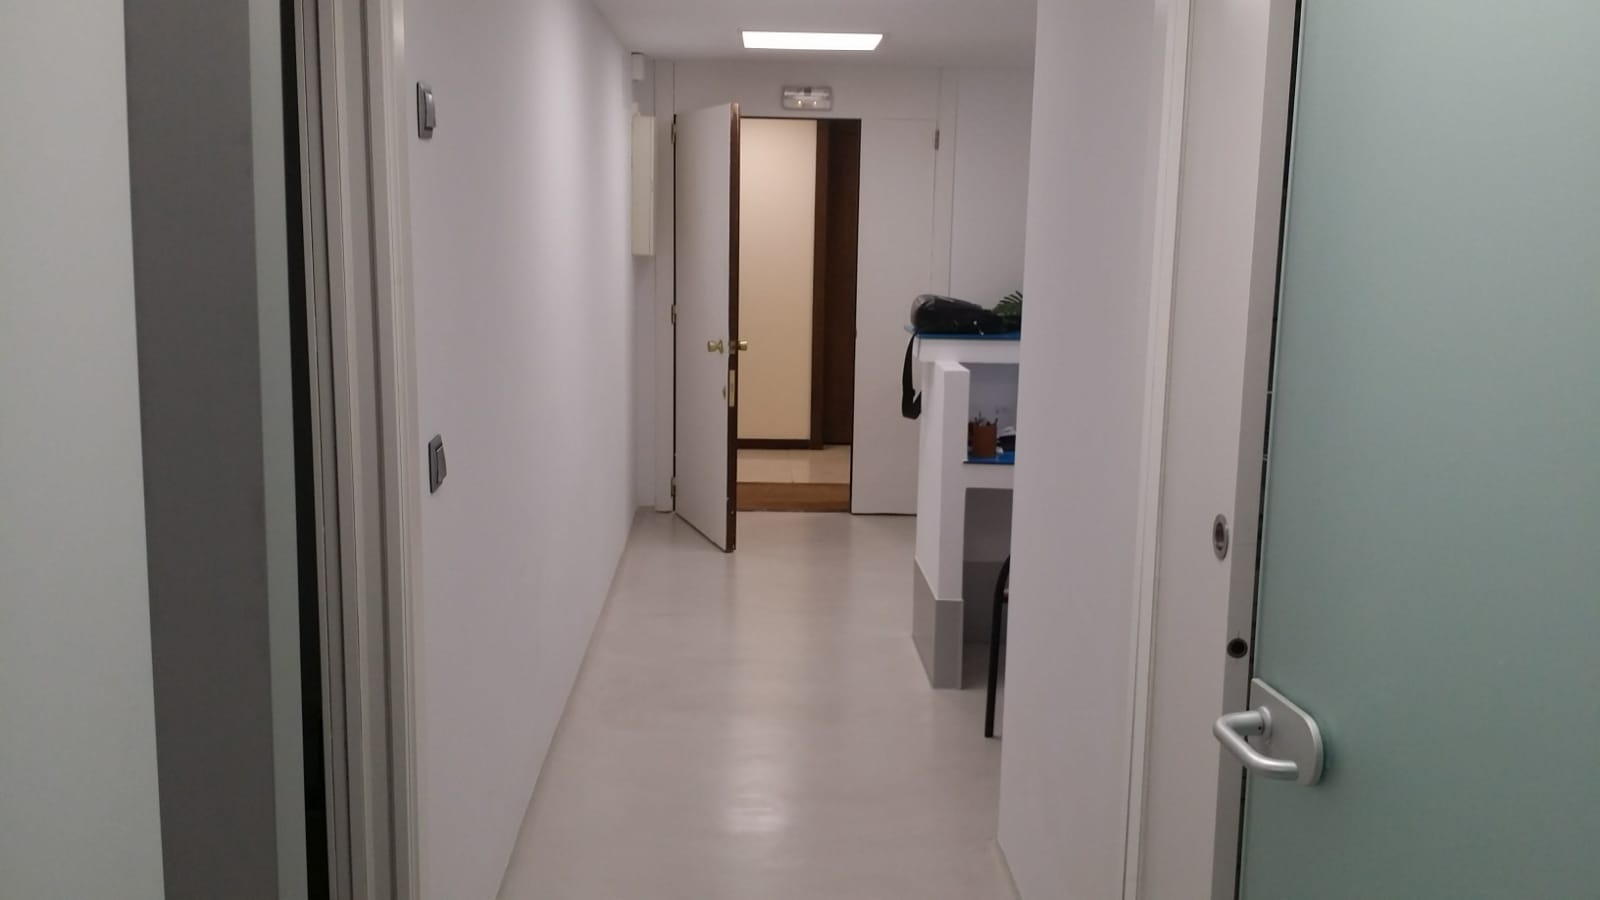 We inaugurate facilities in our Clinic AVR Maxillofacial Surgery Clinic in Barcelona